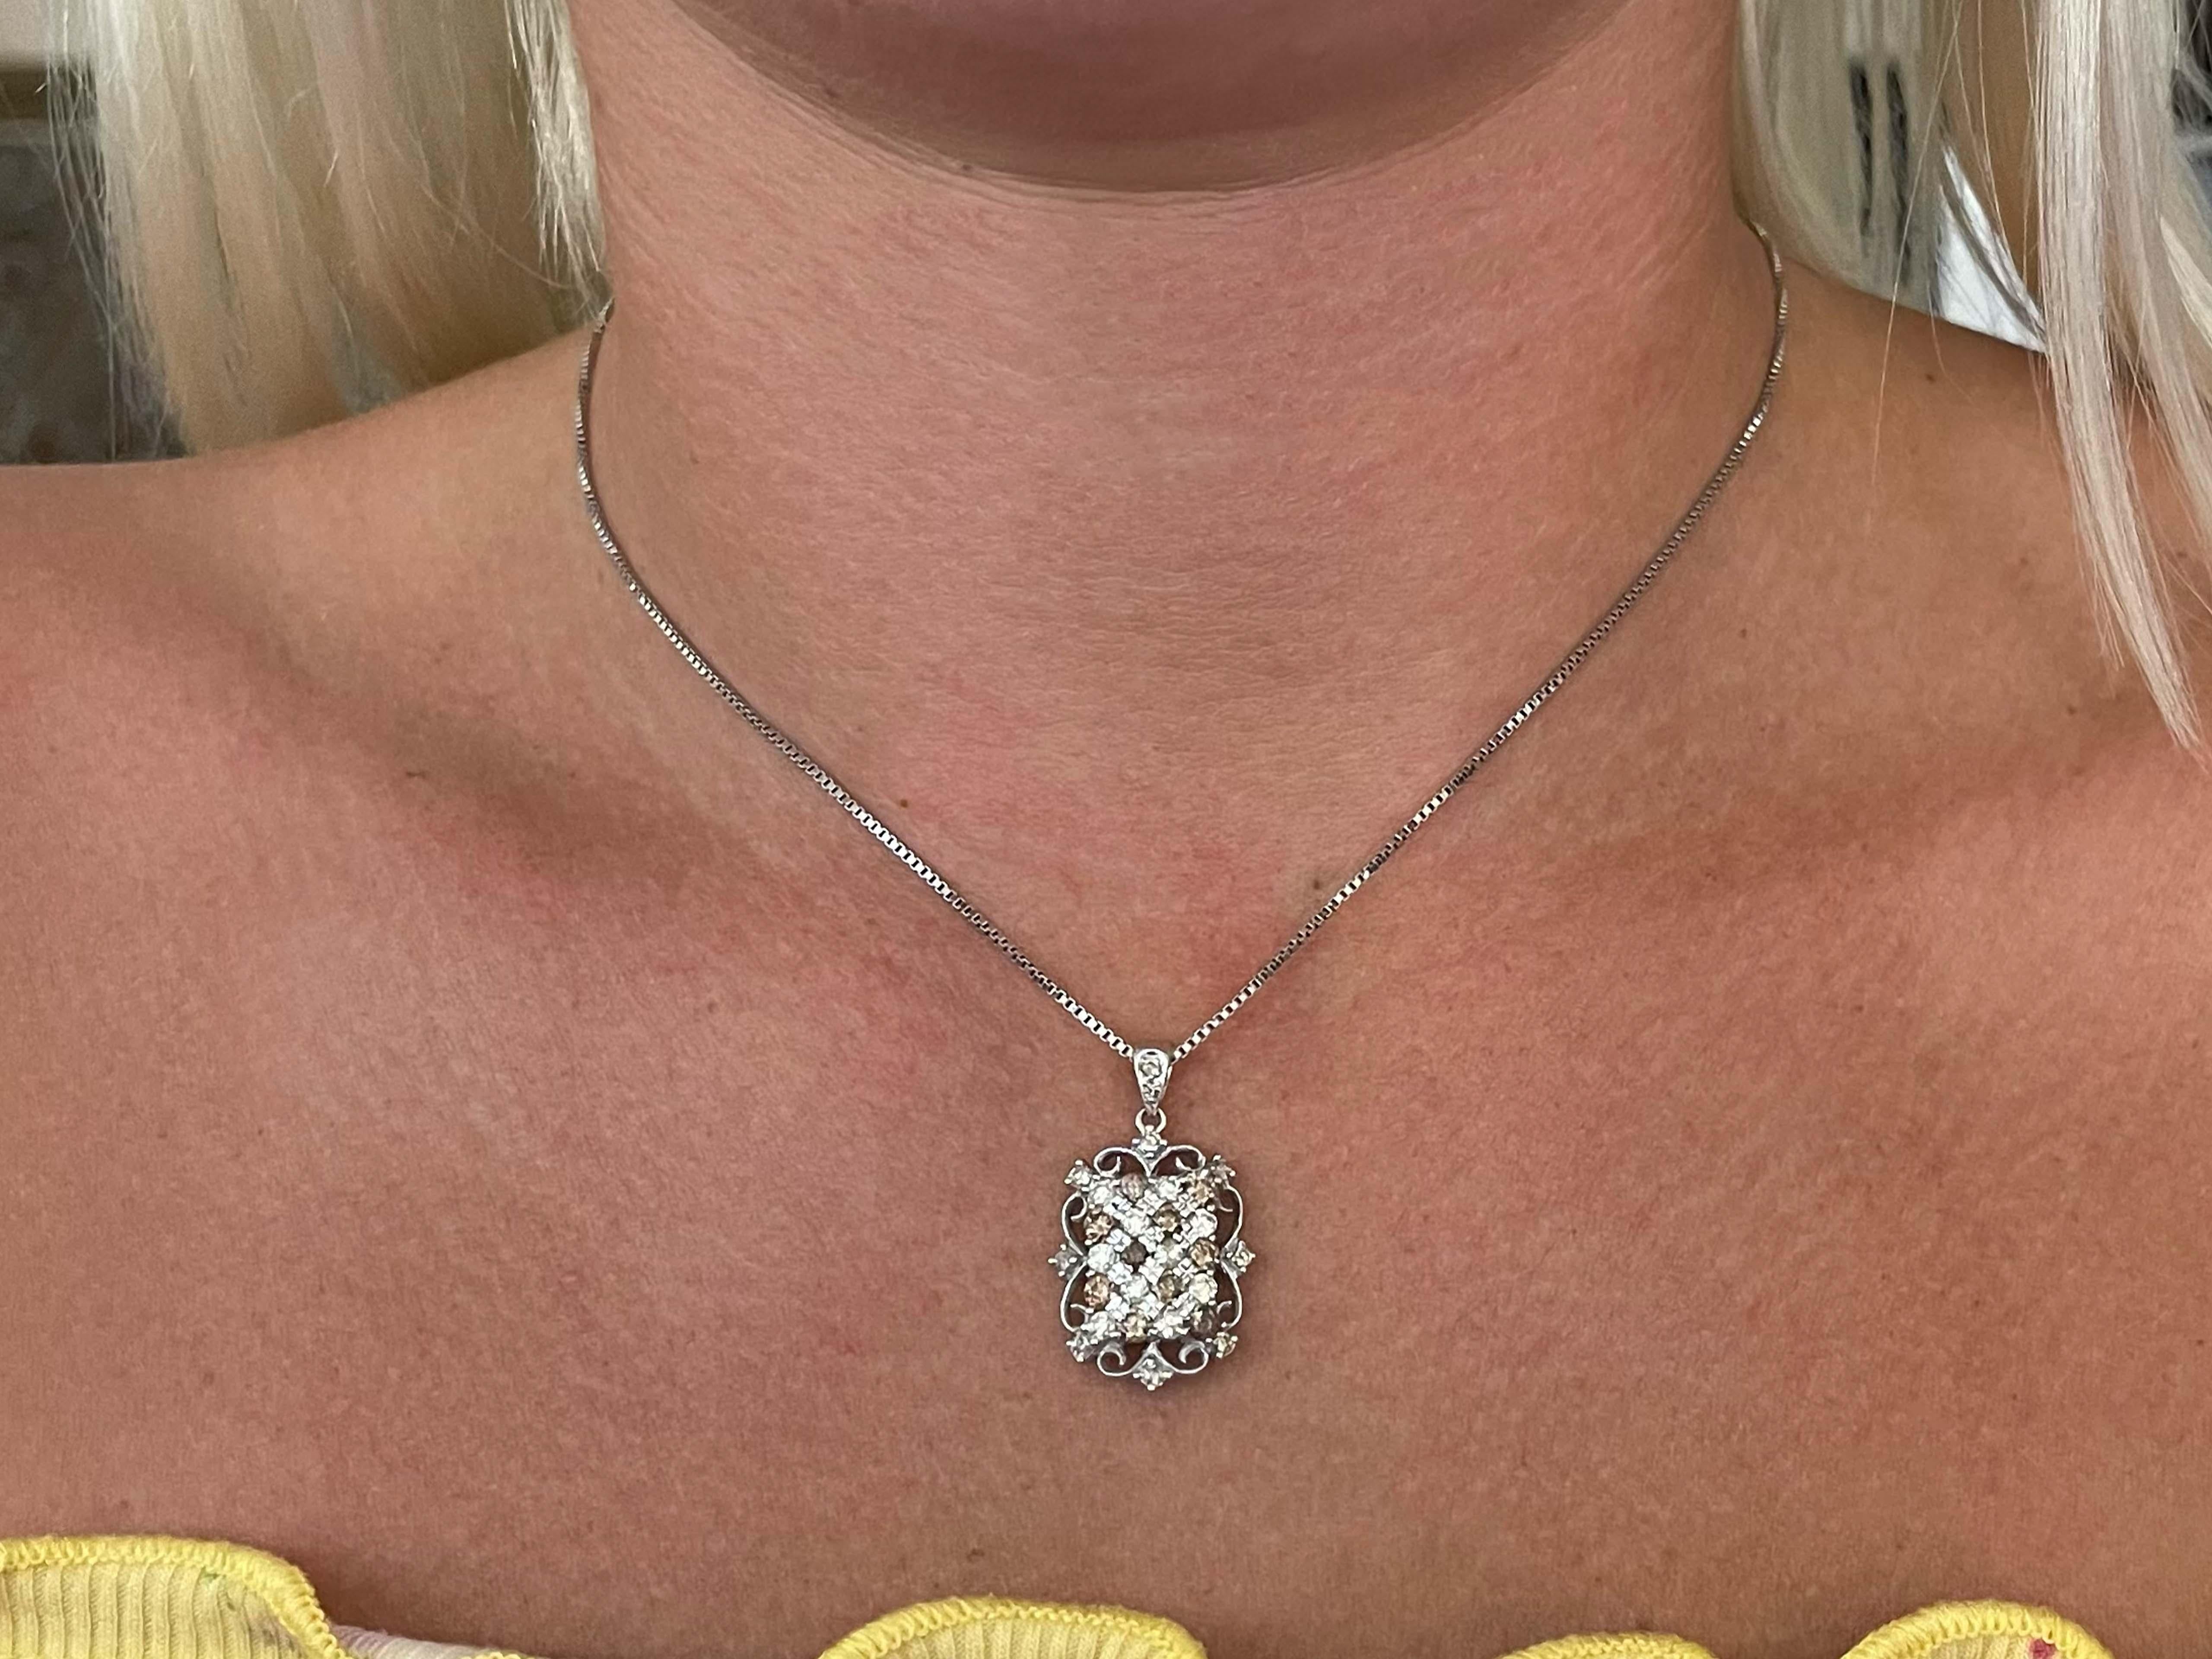 This pendant is truly unique featuring white and chocolate diamonds. The necklace features ~2.00 carats of round brilliant cut diamonds creating endless sparkle. The white diamonds are K-L in color and appear yellow. All the diamonds are SI2-I1 in